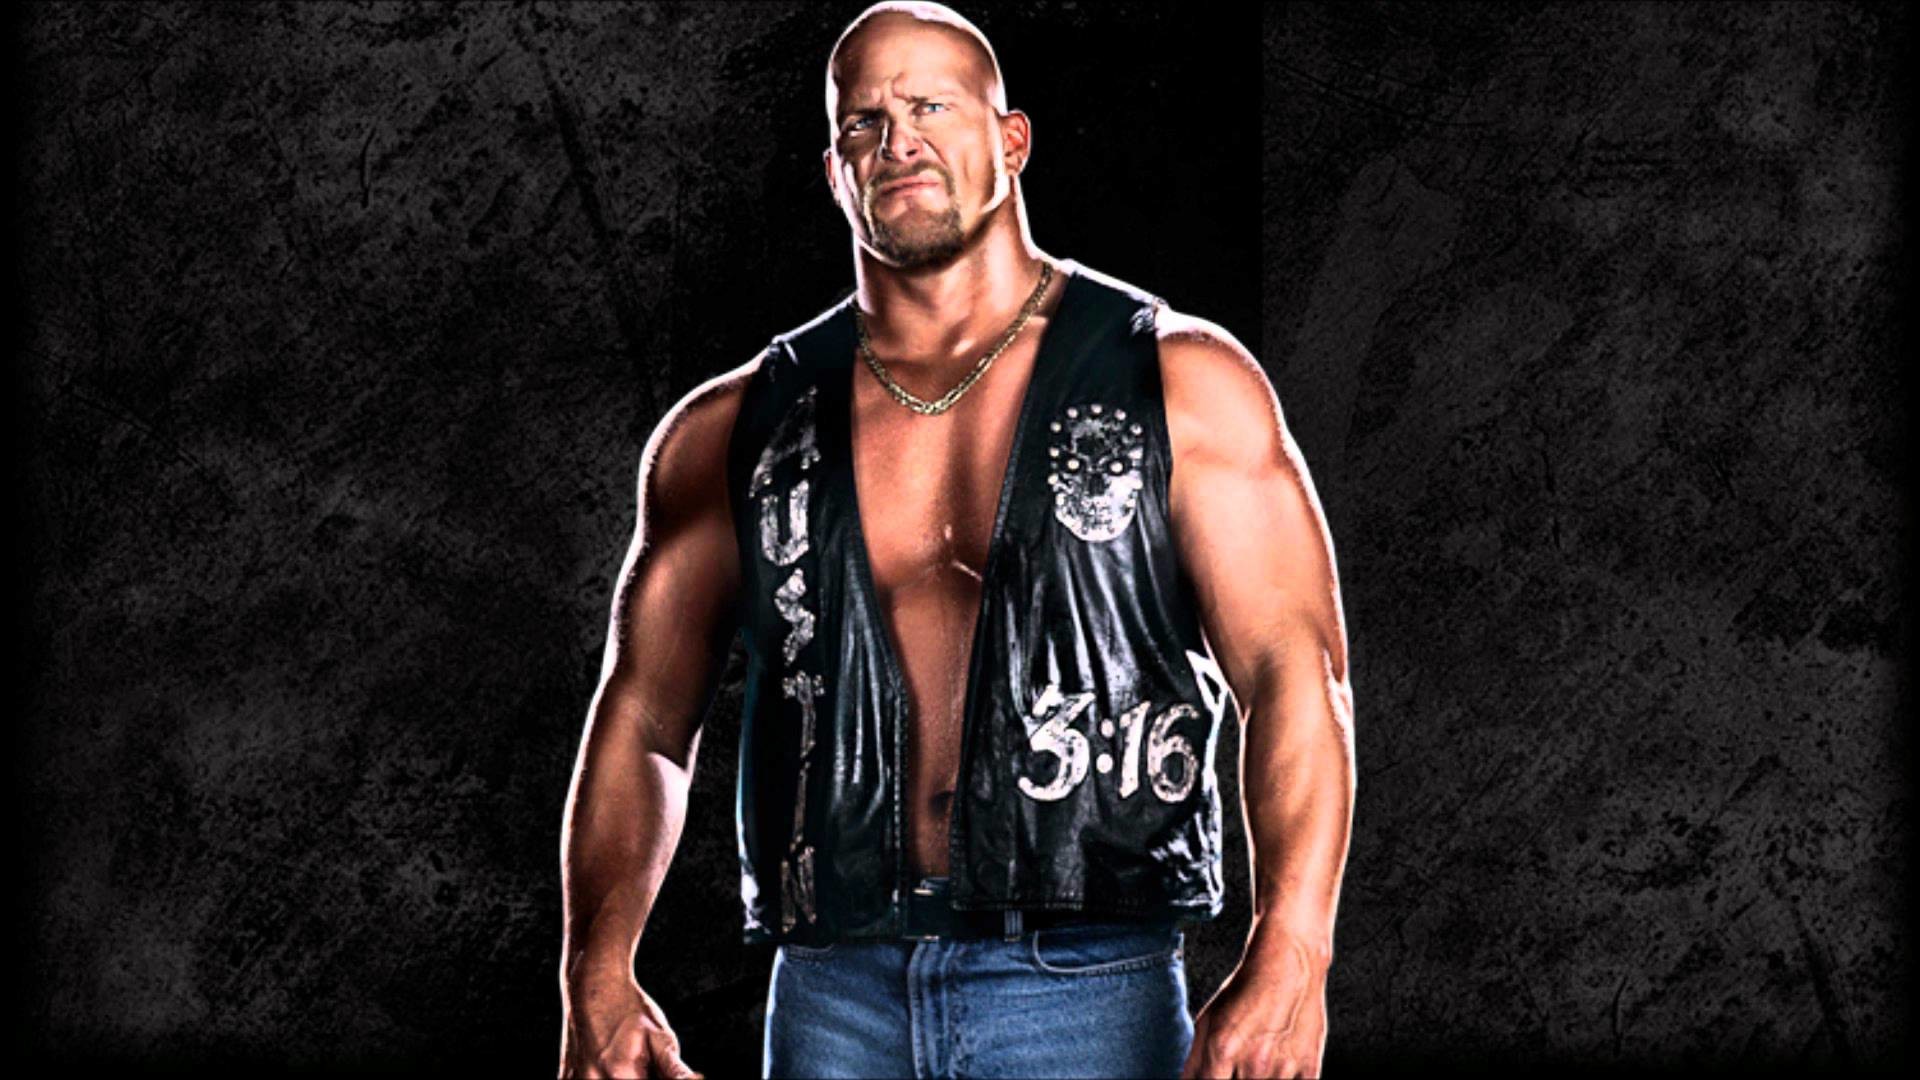 Stone Cold Steve Austin theme song "Glass Shatters" by Disturbed